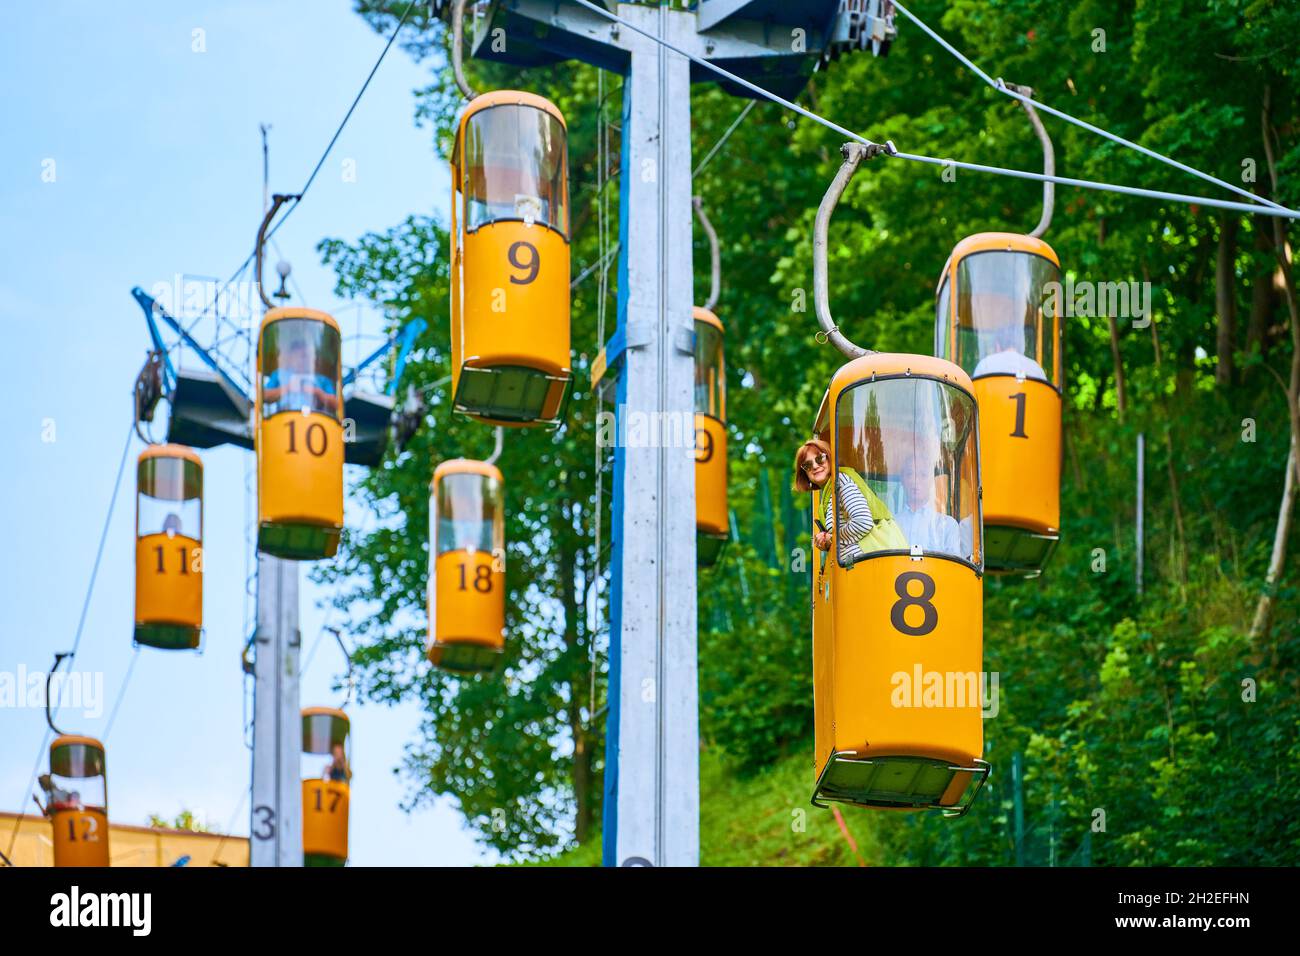 Svetlogorsk, Russia - 08.14.2021 - Cableway from green mountainside.  Svetlogorsk cable car with yellow cars. Fast aerial lift for tourists to  beach of Stock Photo - Alamy